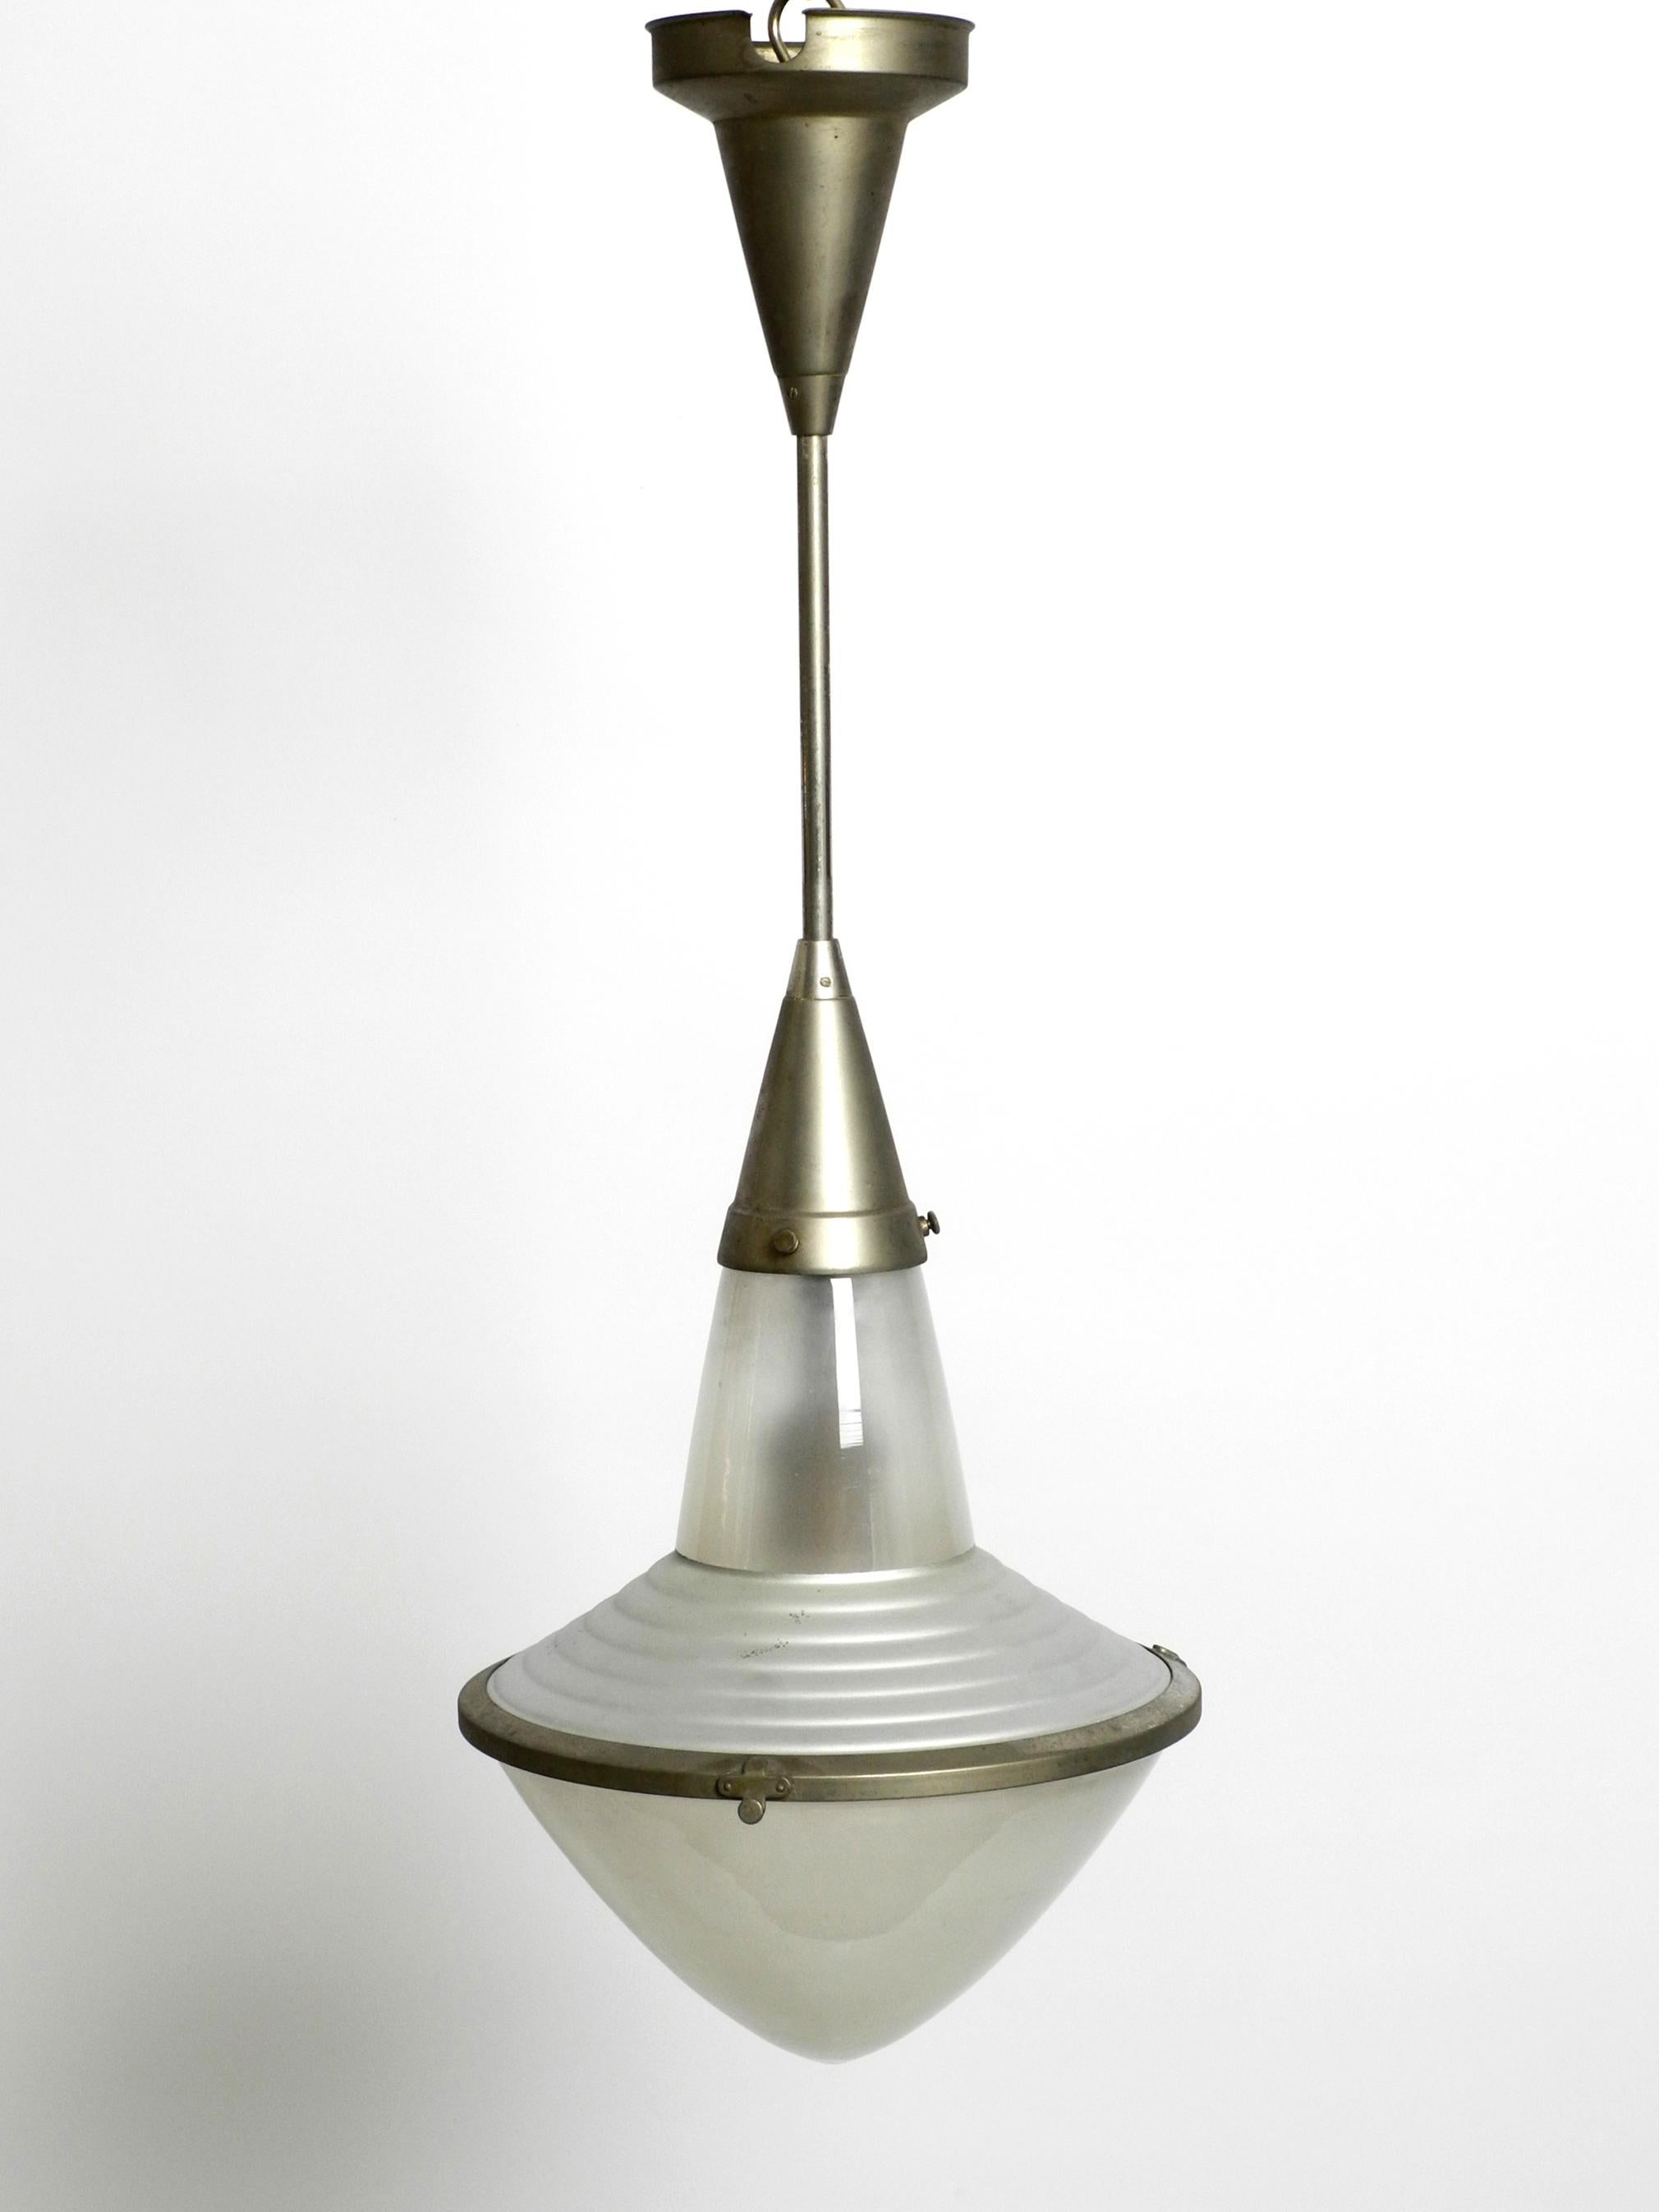 Rare 1930s Pendant Lamp by Adolf Meyer for Zeiss Ikon with an Adjustable Shade 7